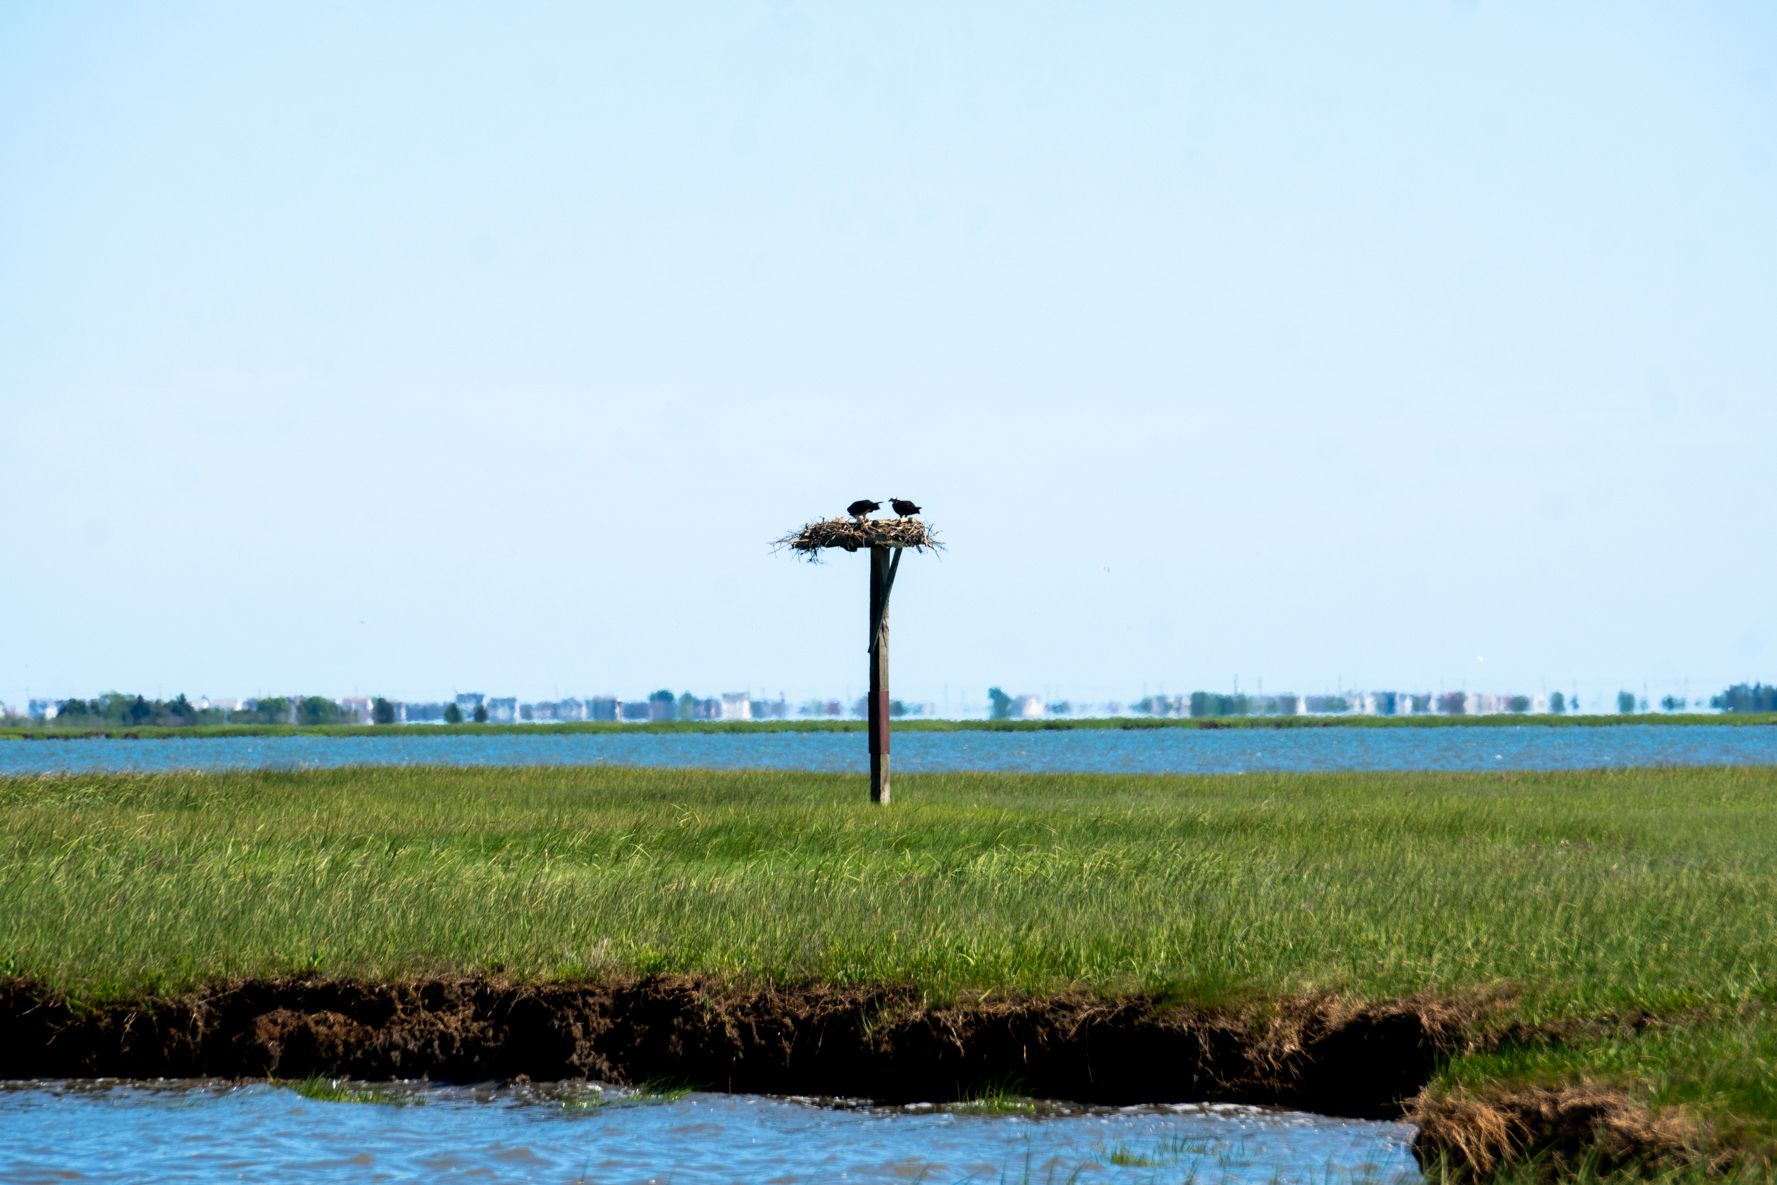 A pair of ospreys nesting on the Reeds Bay in Galloway, NJ